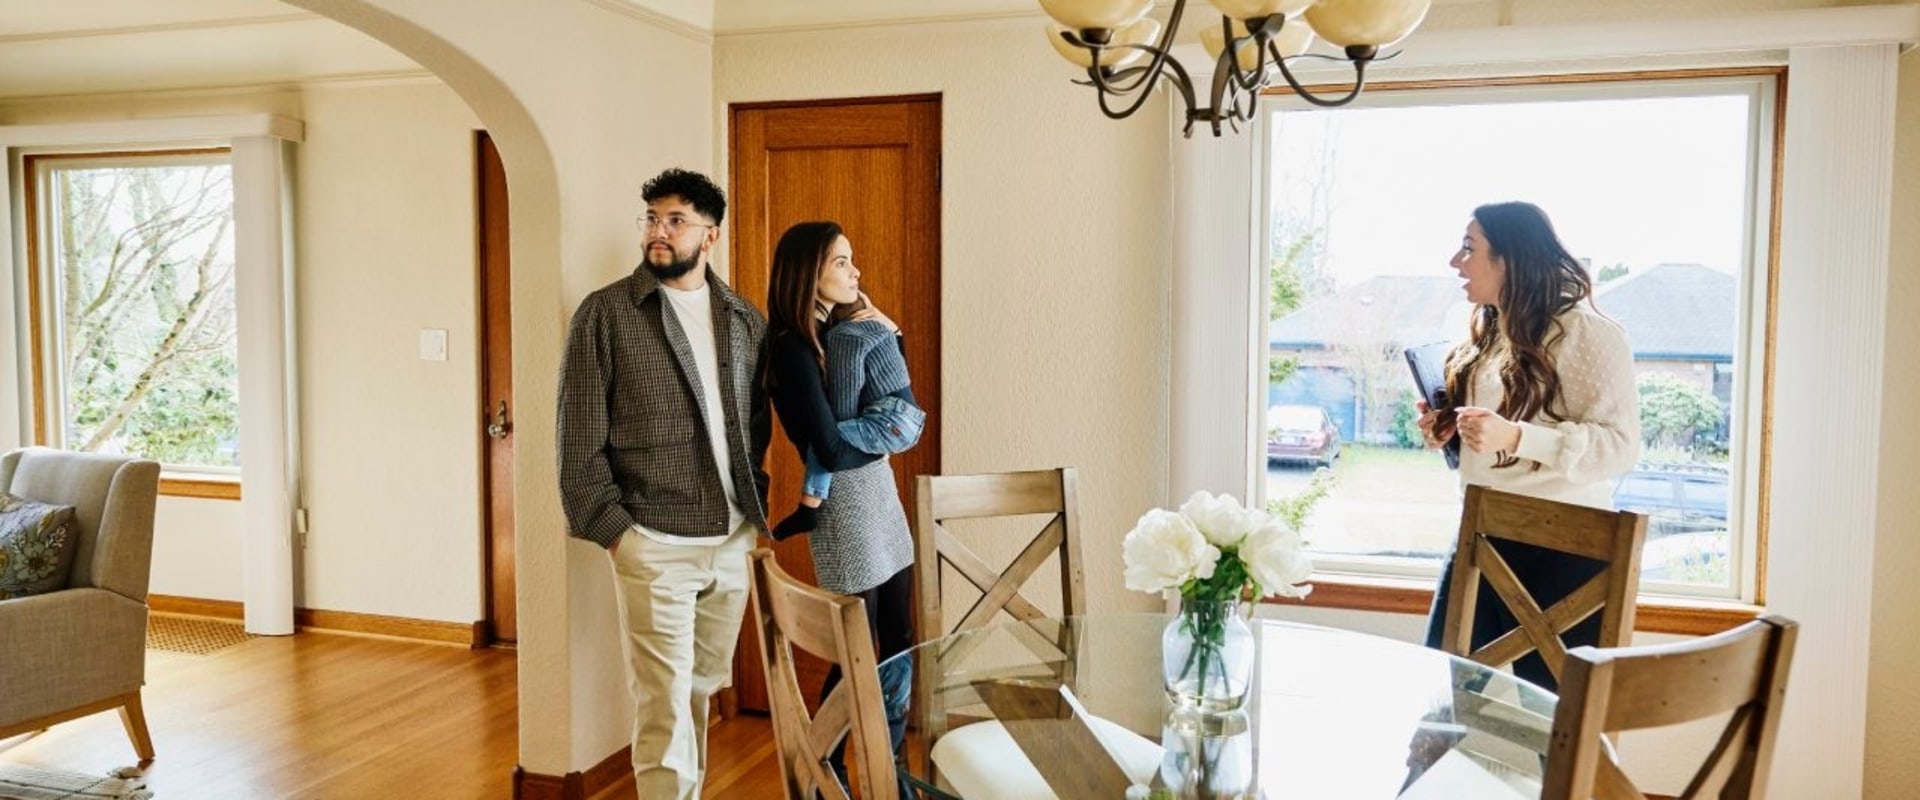 No Need for Repairs or Staging: A Fast and Hassle-Free Process for Selling Your Philadelphia Home